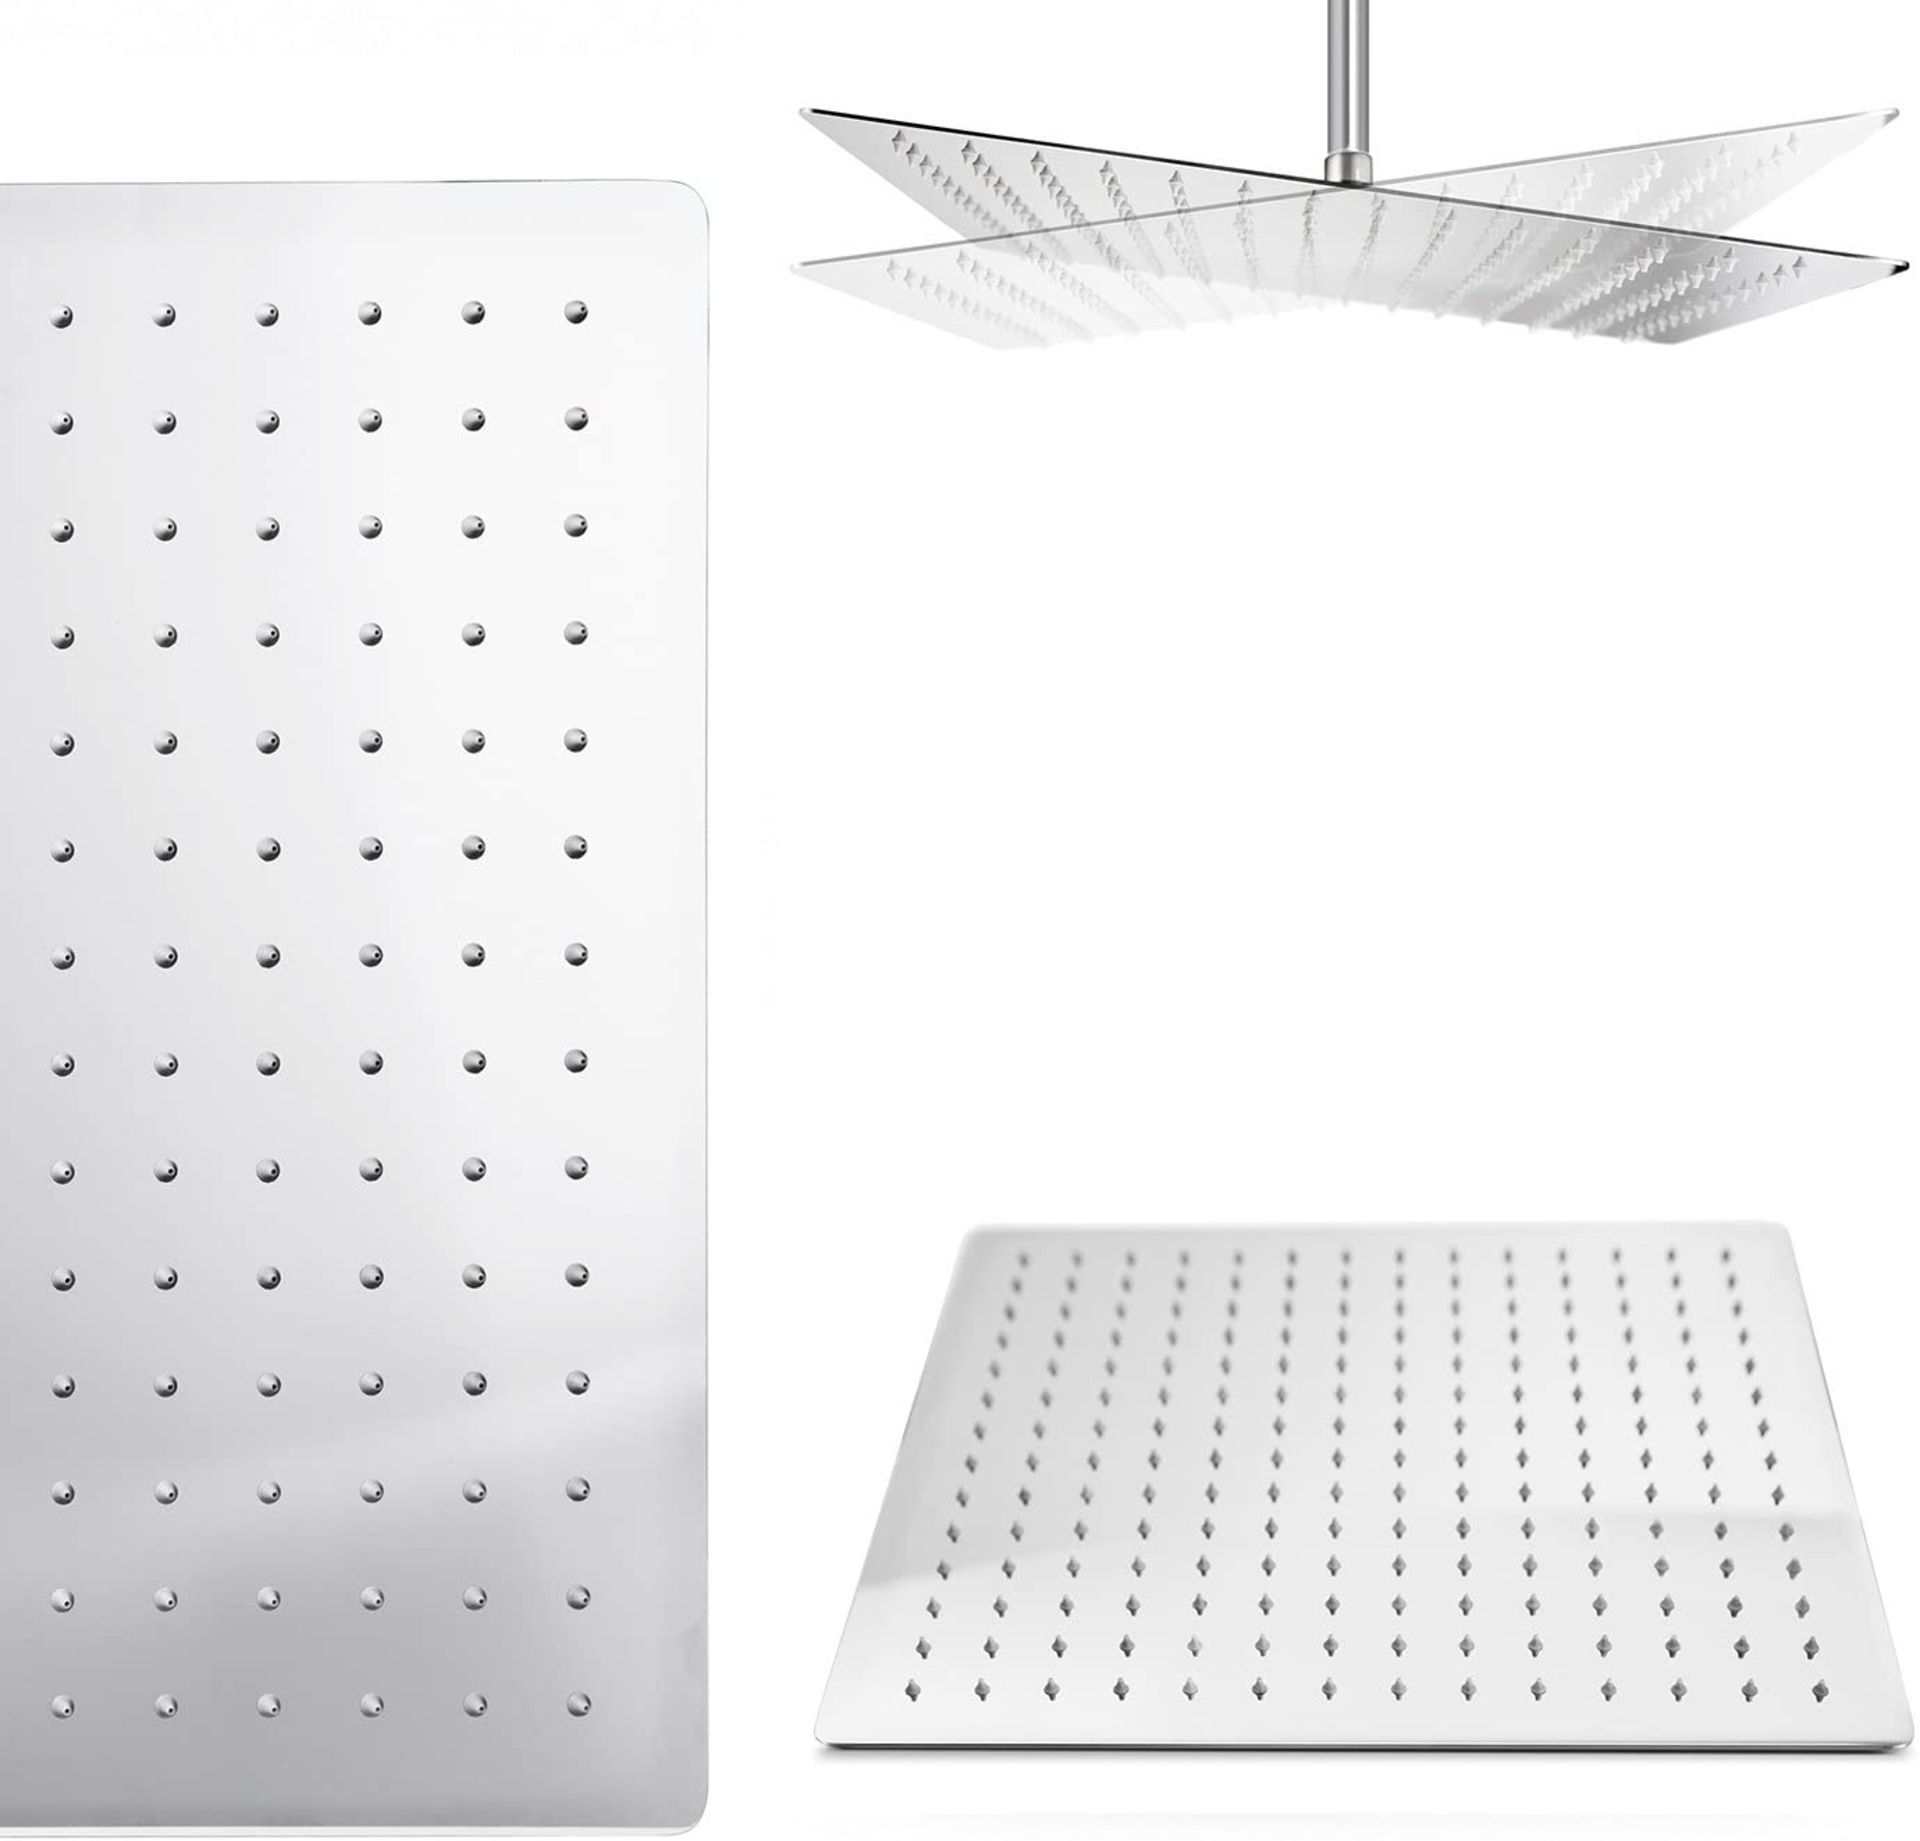 (MG1009) 16 Inch Square Fixed Rainfall Shower Head Easy Clean Stainless Steel Swivel Joint. Cra...